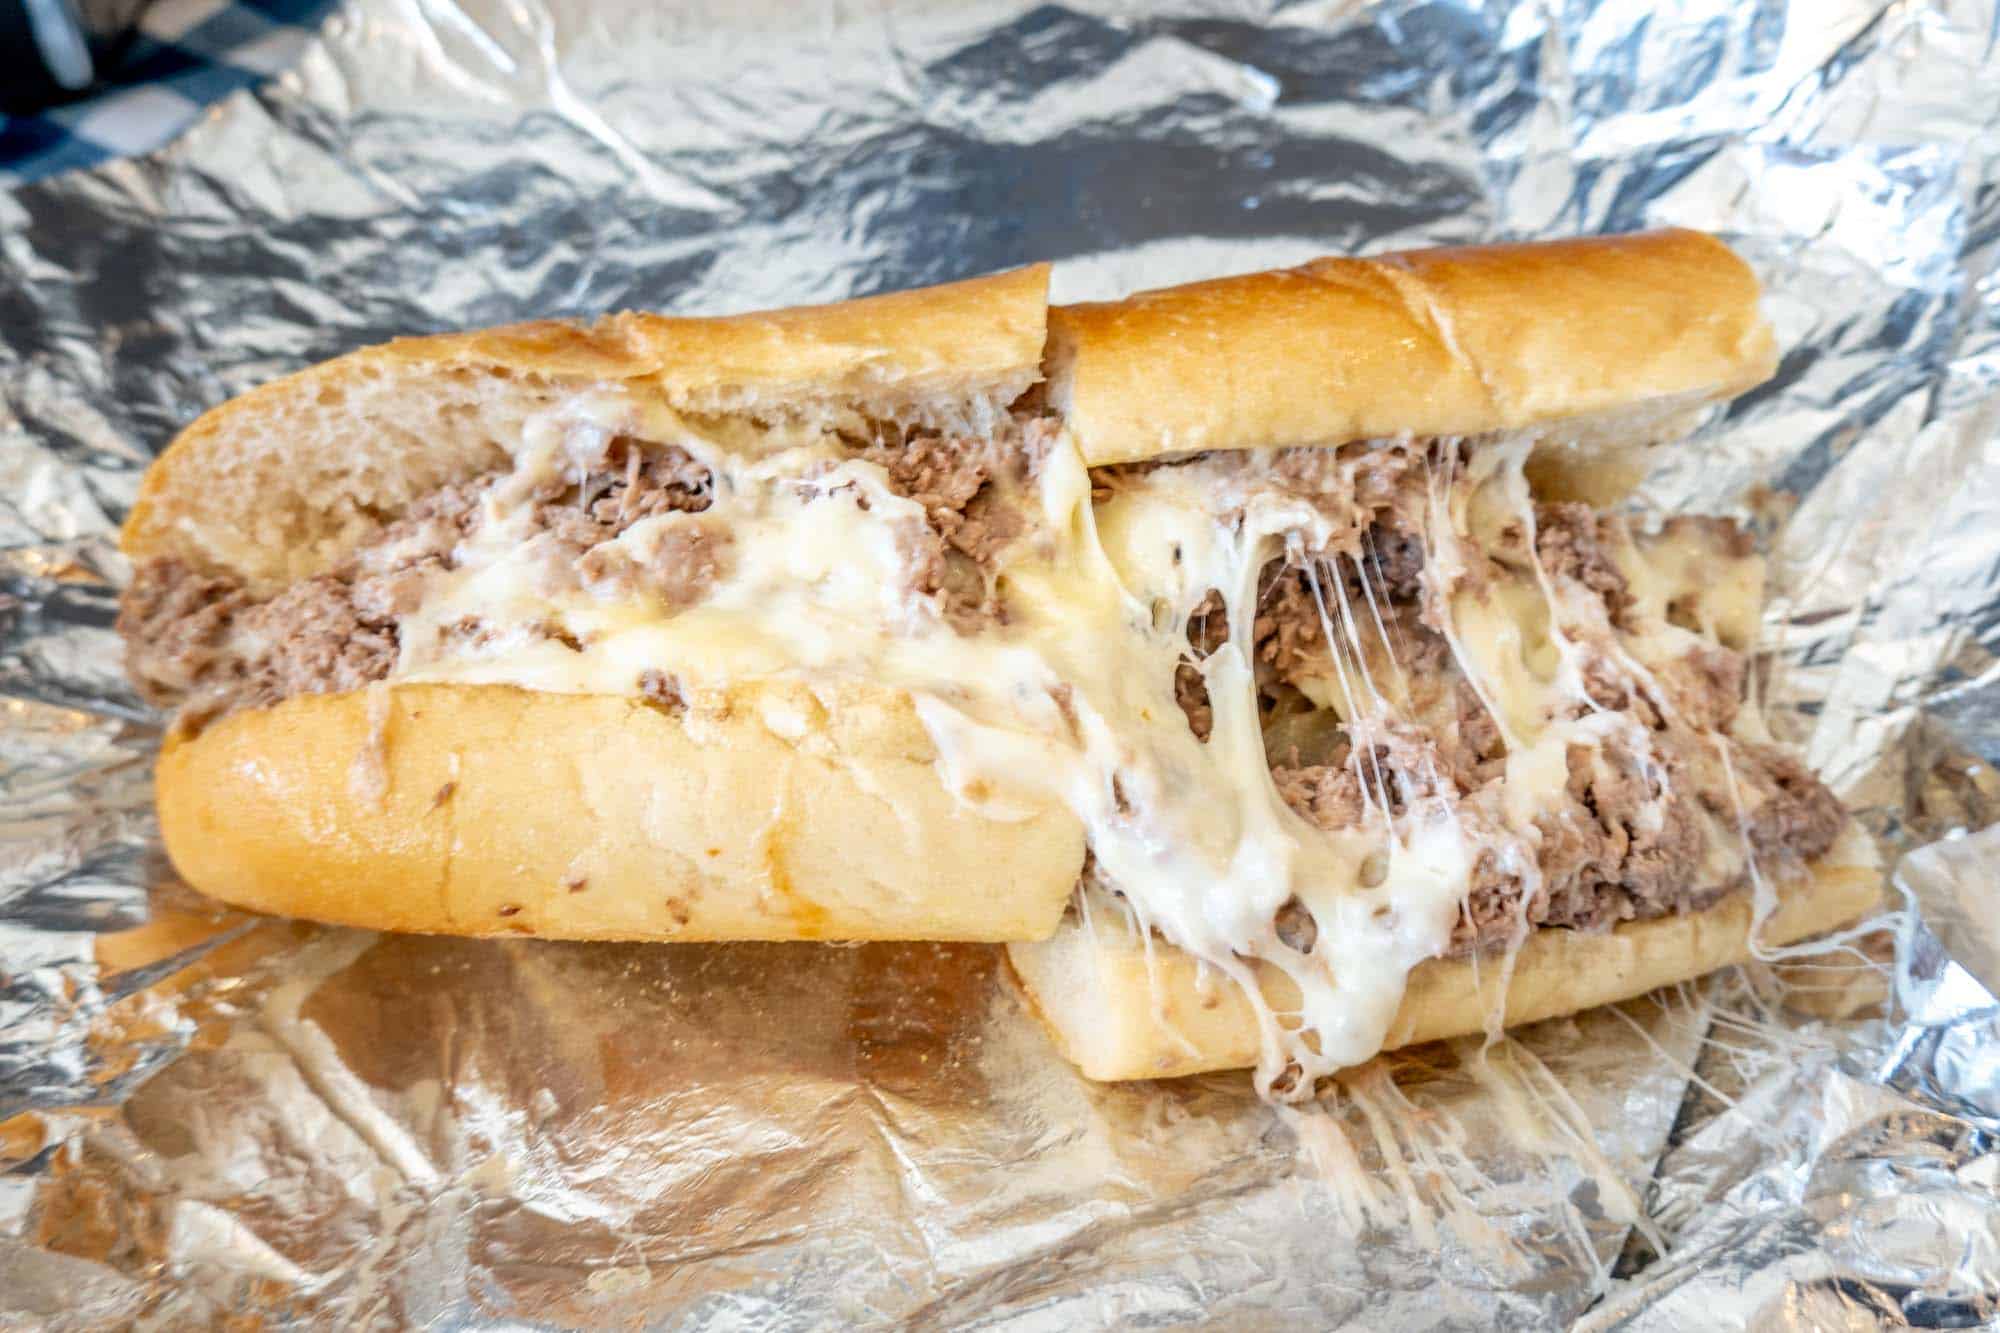 Gooey, extra cheese on a cheesesteak at Mama's